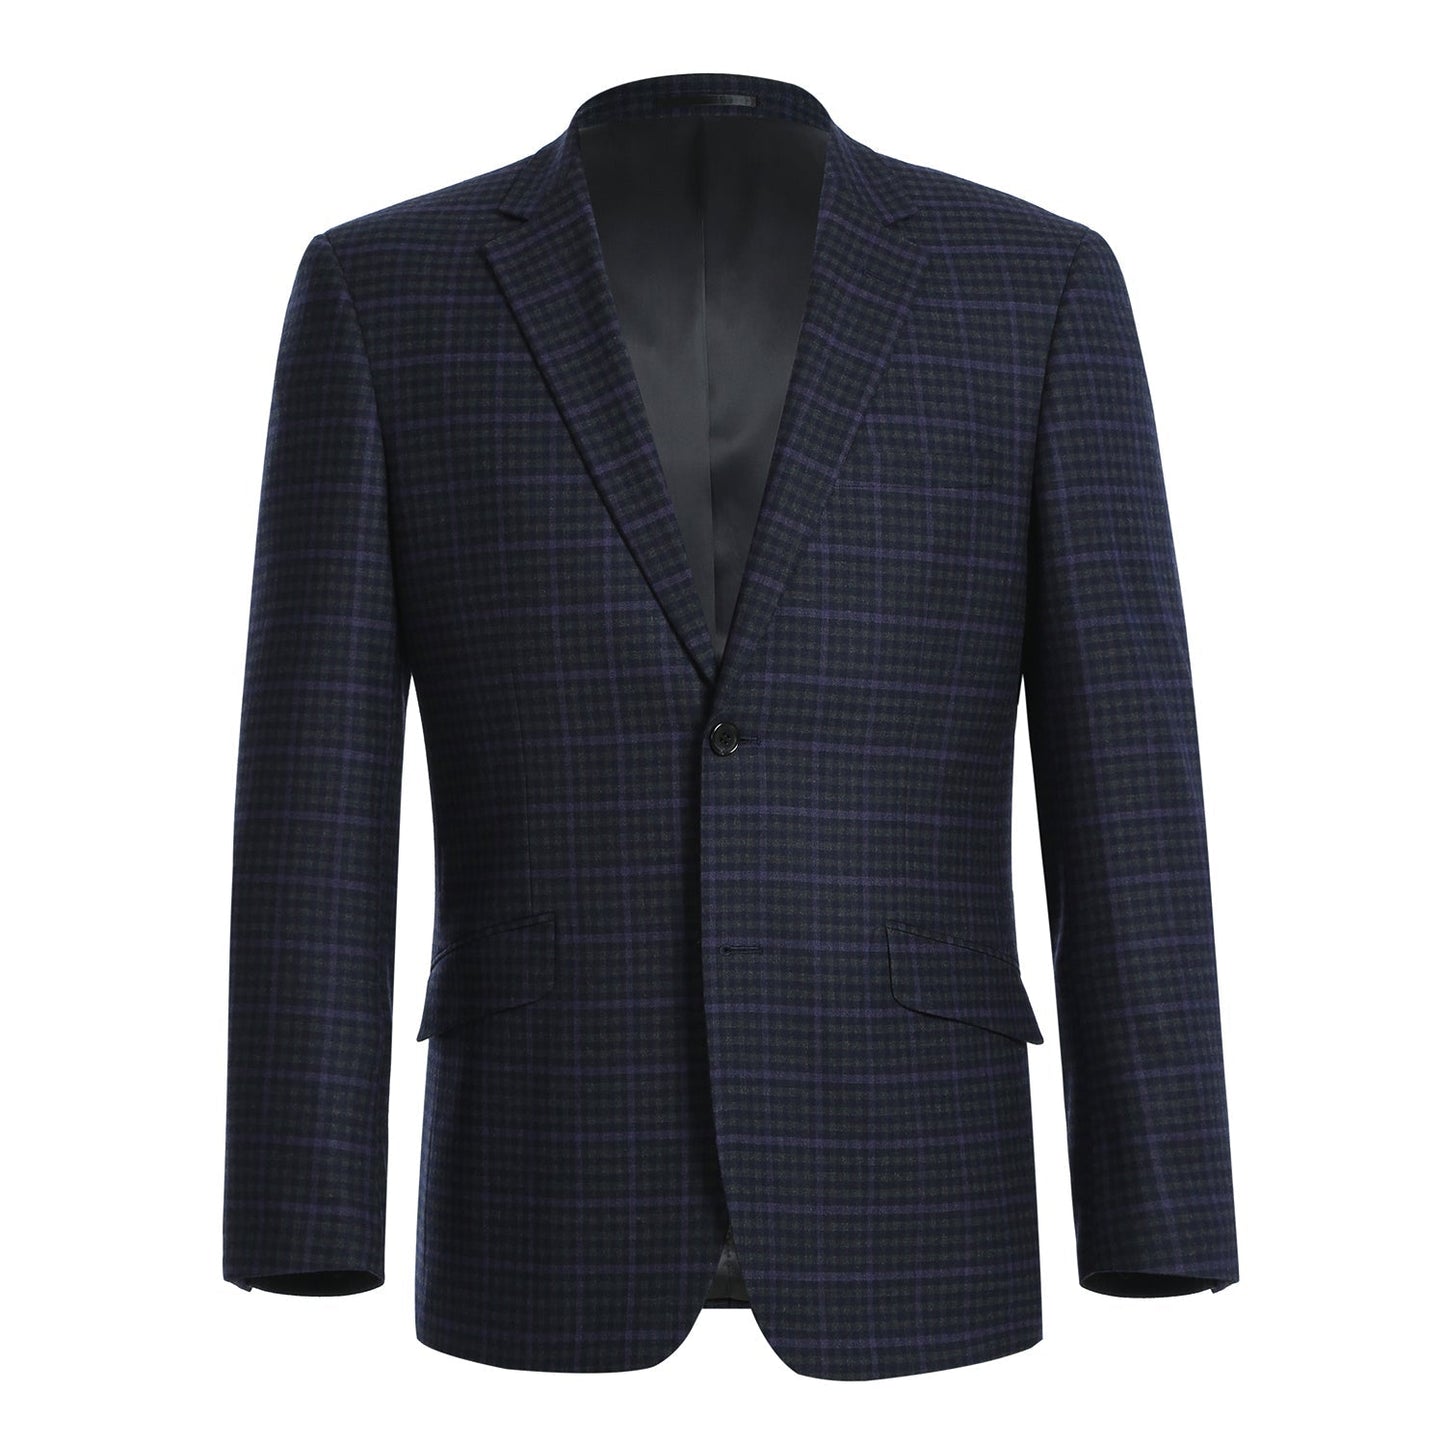 562-6 Men's Slim Fit Charcoal, Navy and Purple Wool Check Suit